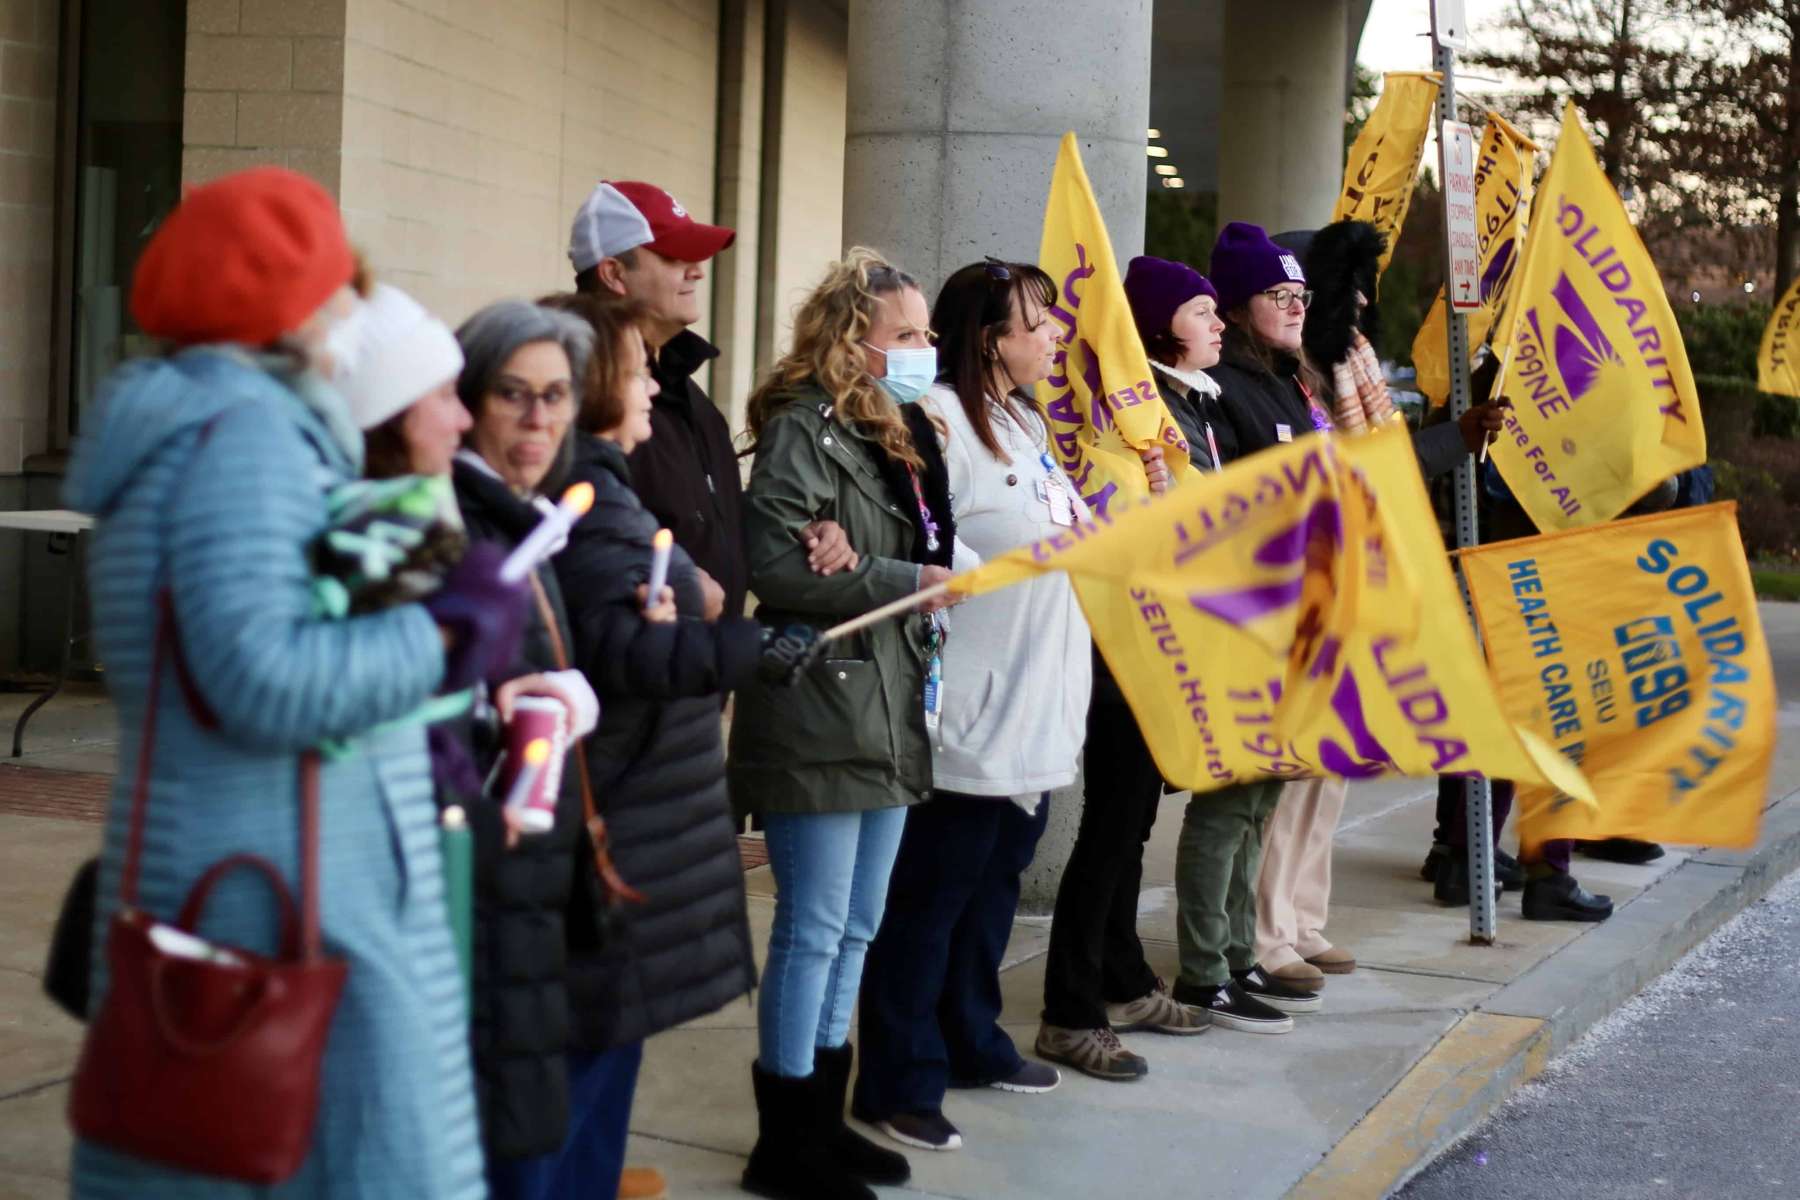 Rhode Island News: Women & Infants Hospital caregivers hold candlelight vigil to honor mothers and babies impacted by staffing crisis